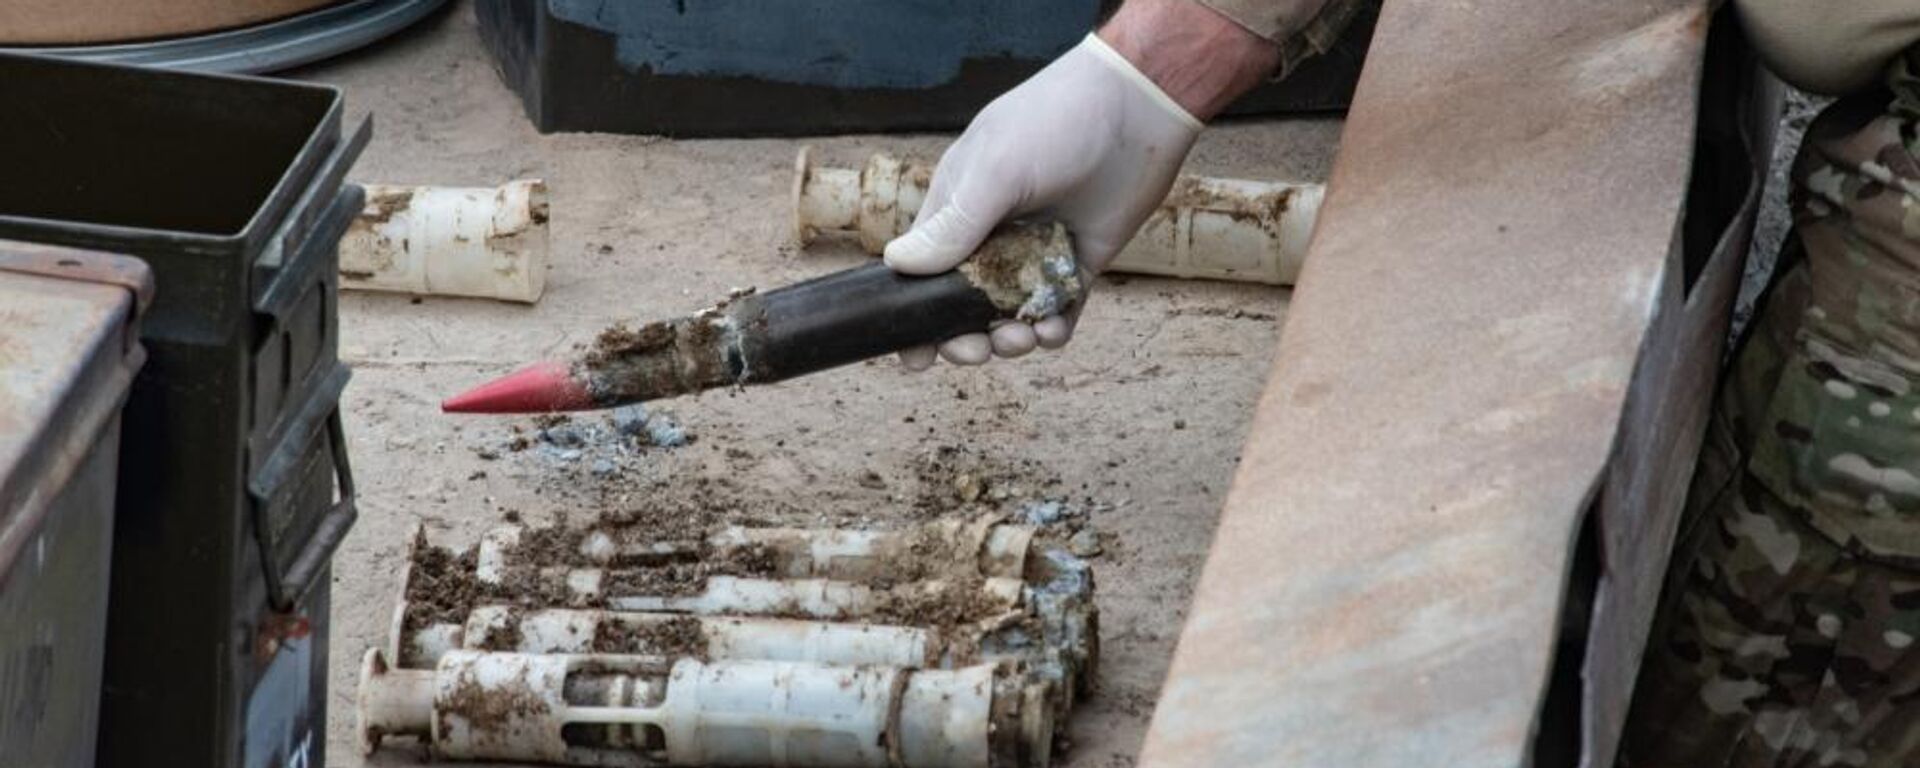 U.S. Air Force National Guard Explosive Ordnance Disposal Techinicians safely prepare several contaminated and compromised depleted uranium rounds on June 23, 2022 at Tooele Army Depot, UT. - Sputnik International, 1920, 22.03.2023